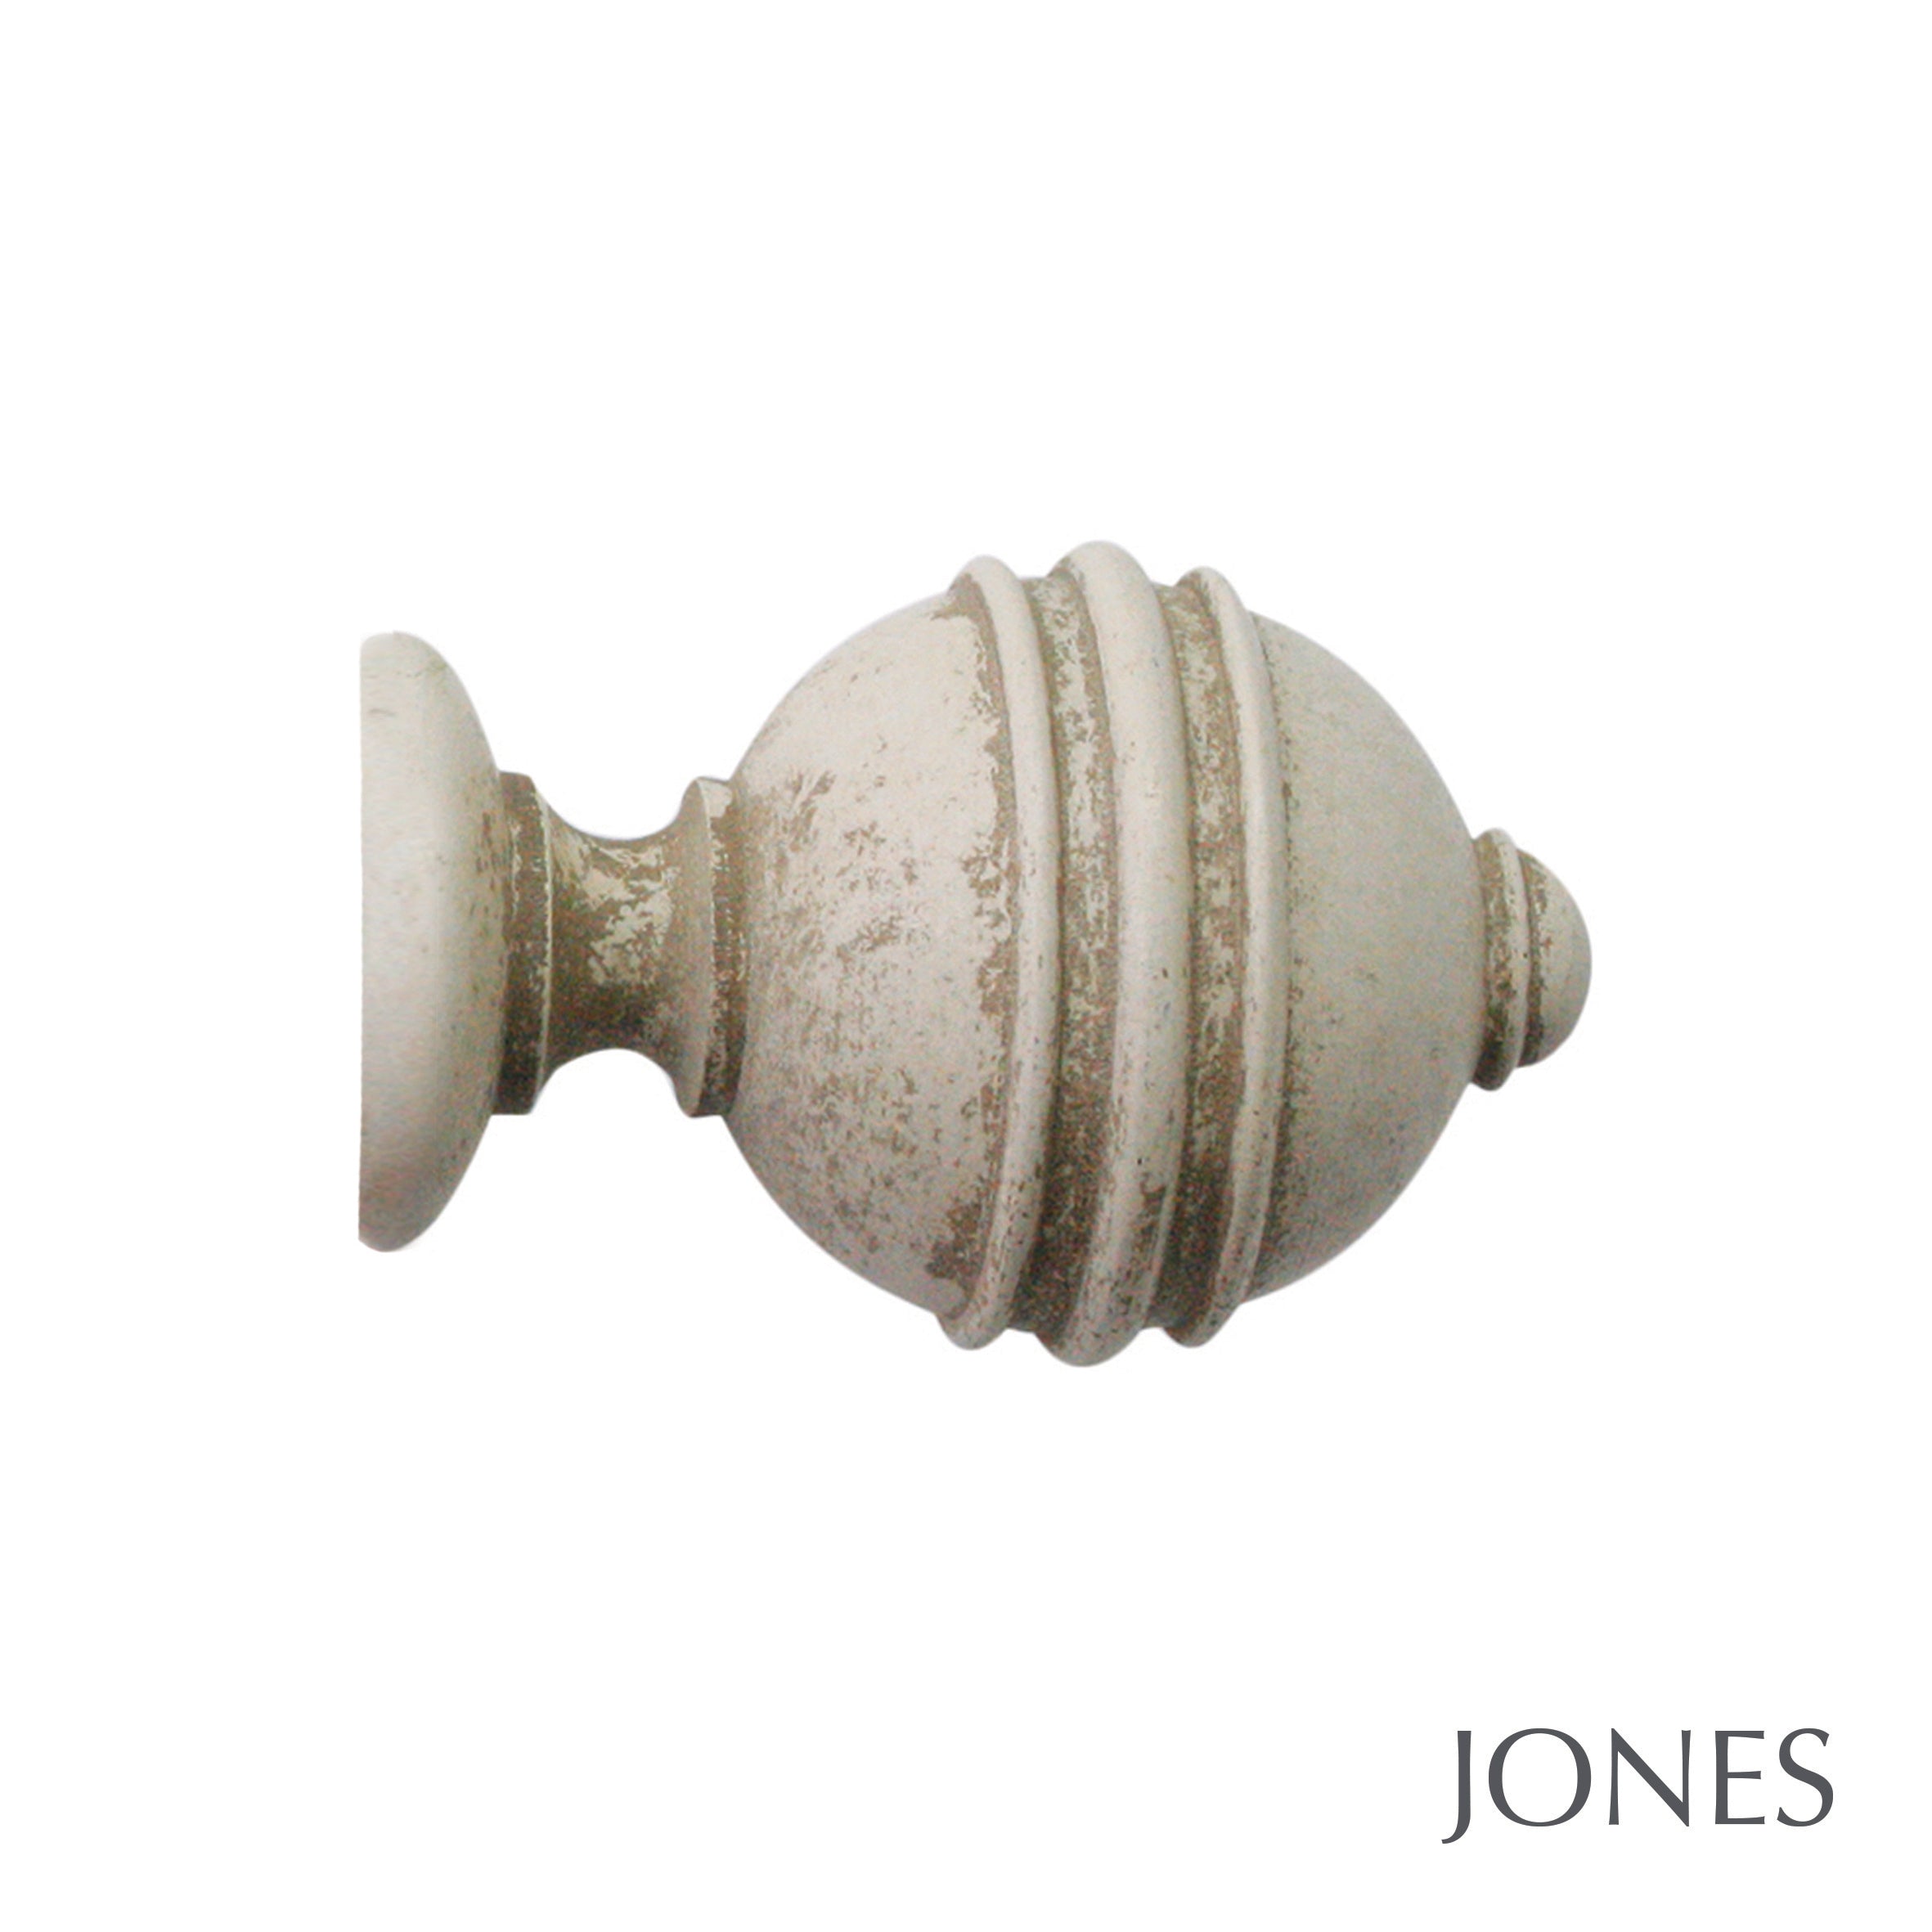 Jones Interiors Florentine Ribbed Ball Finial Curtain Pole Set in Putty